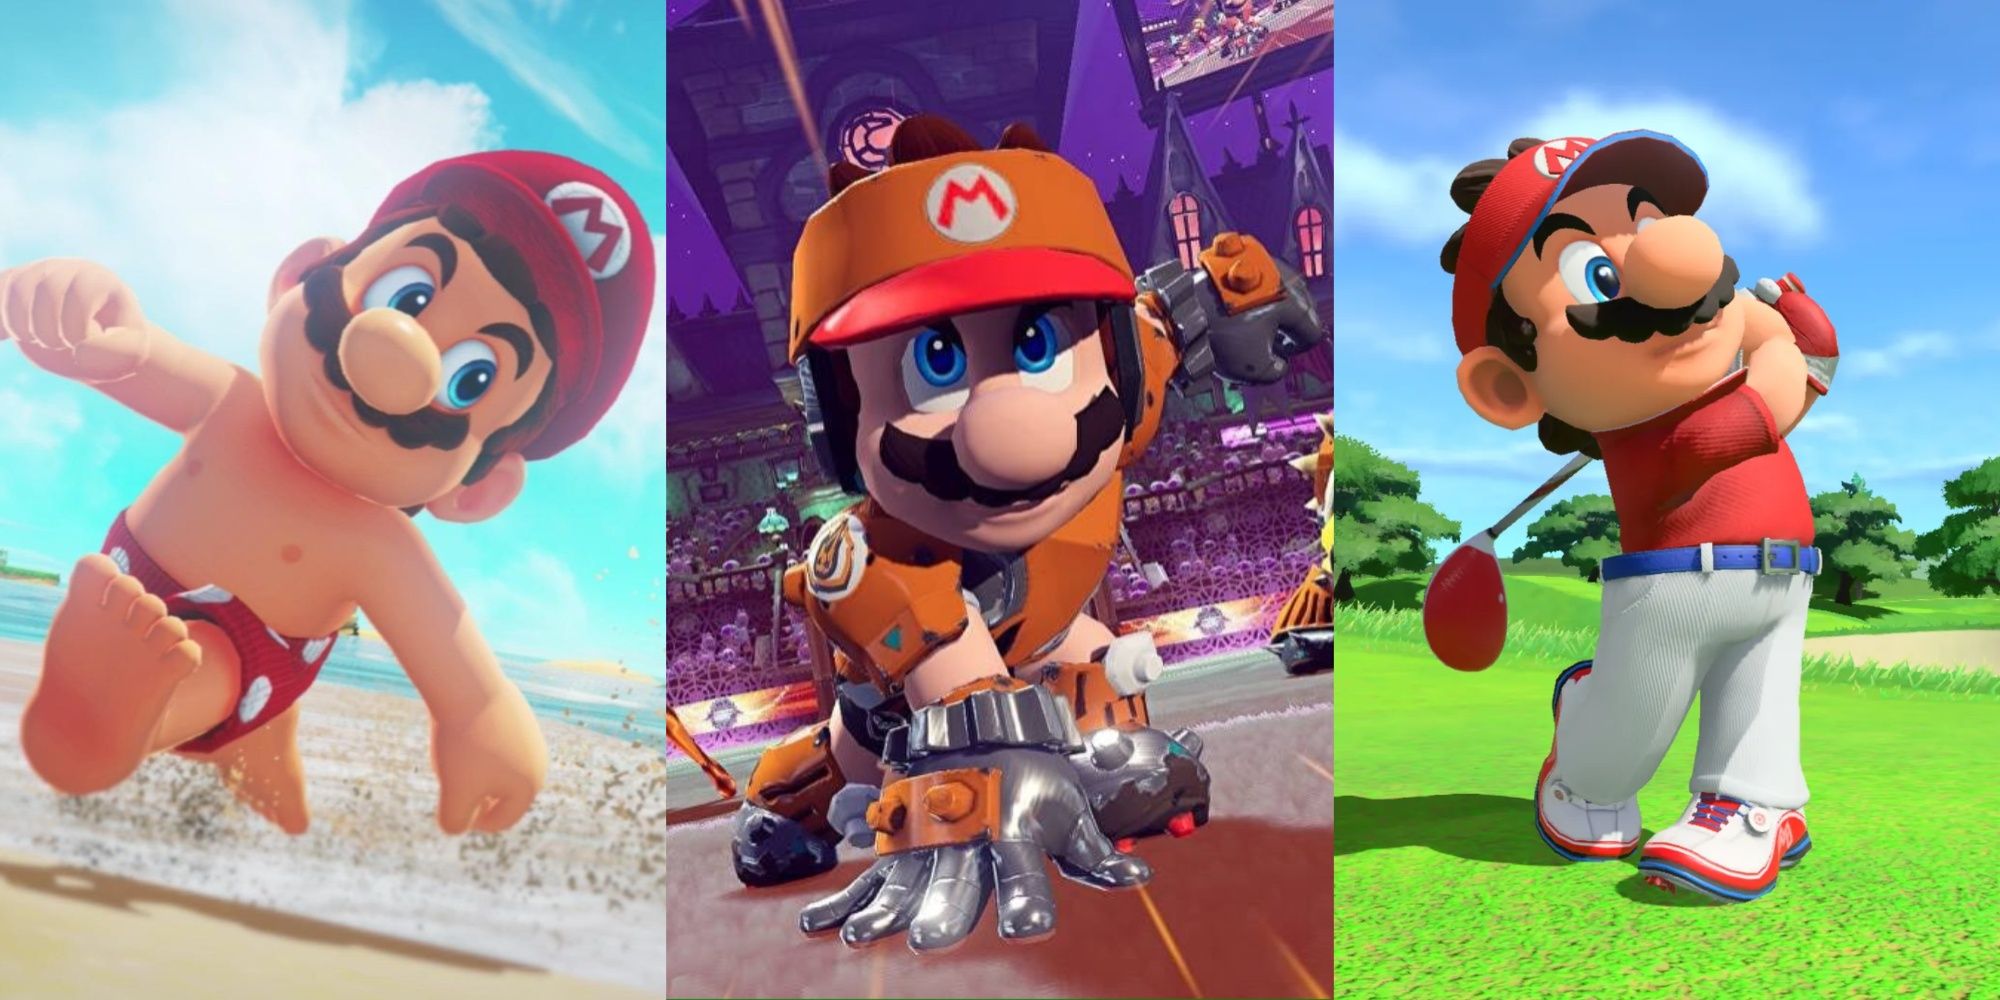 mario in odyssey, strikers: battle league, and golf: super rush